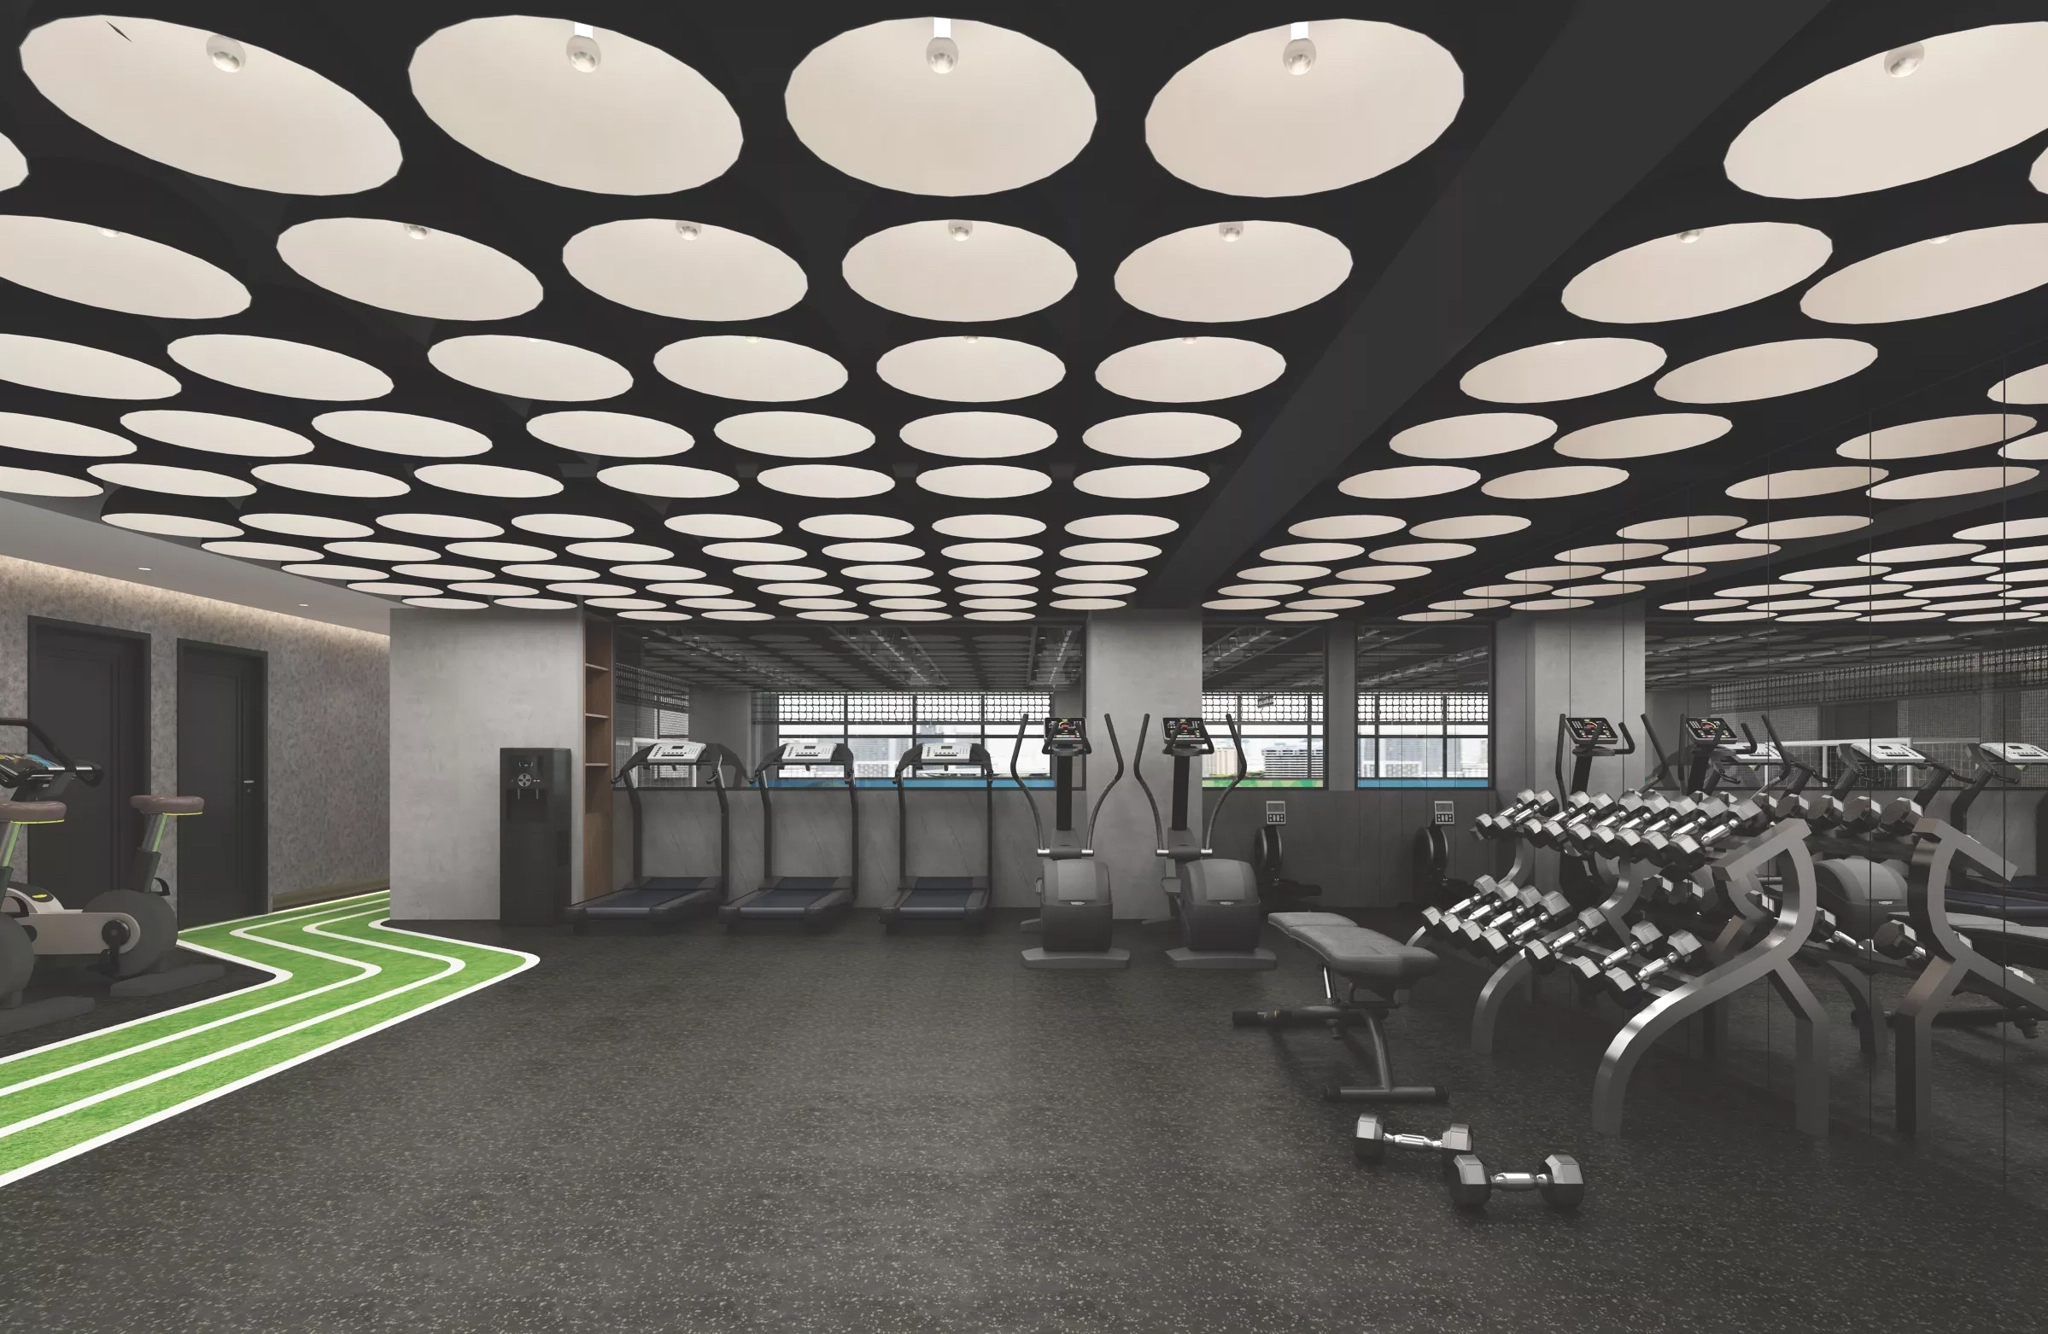 A rendition of the new gymnasium that is currently under construction at the Macau Football Associations headquarters - Photo courtesy of FIFA